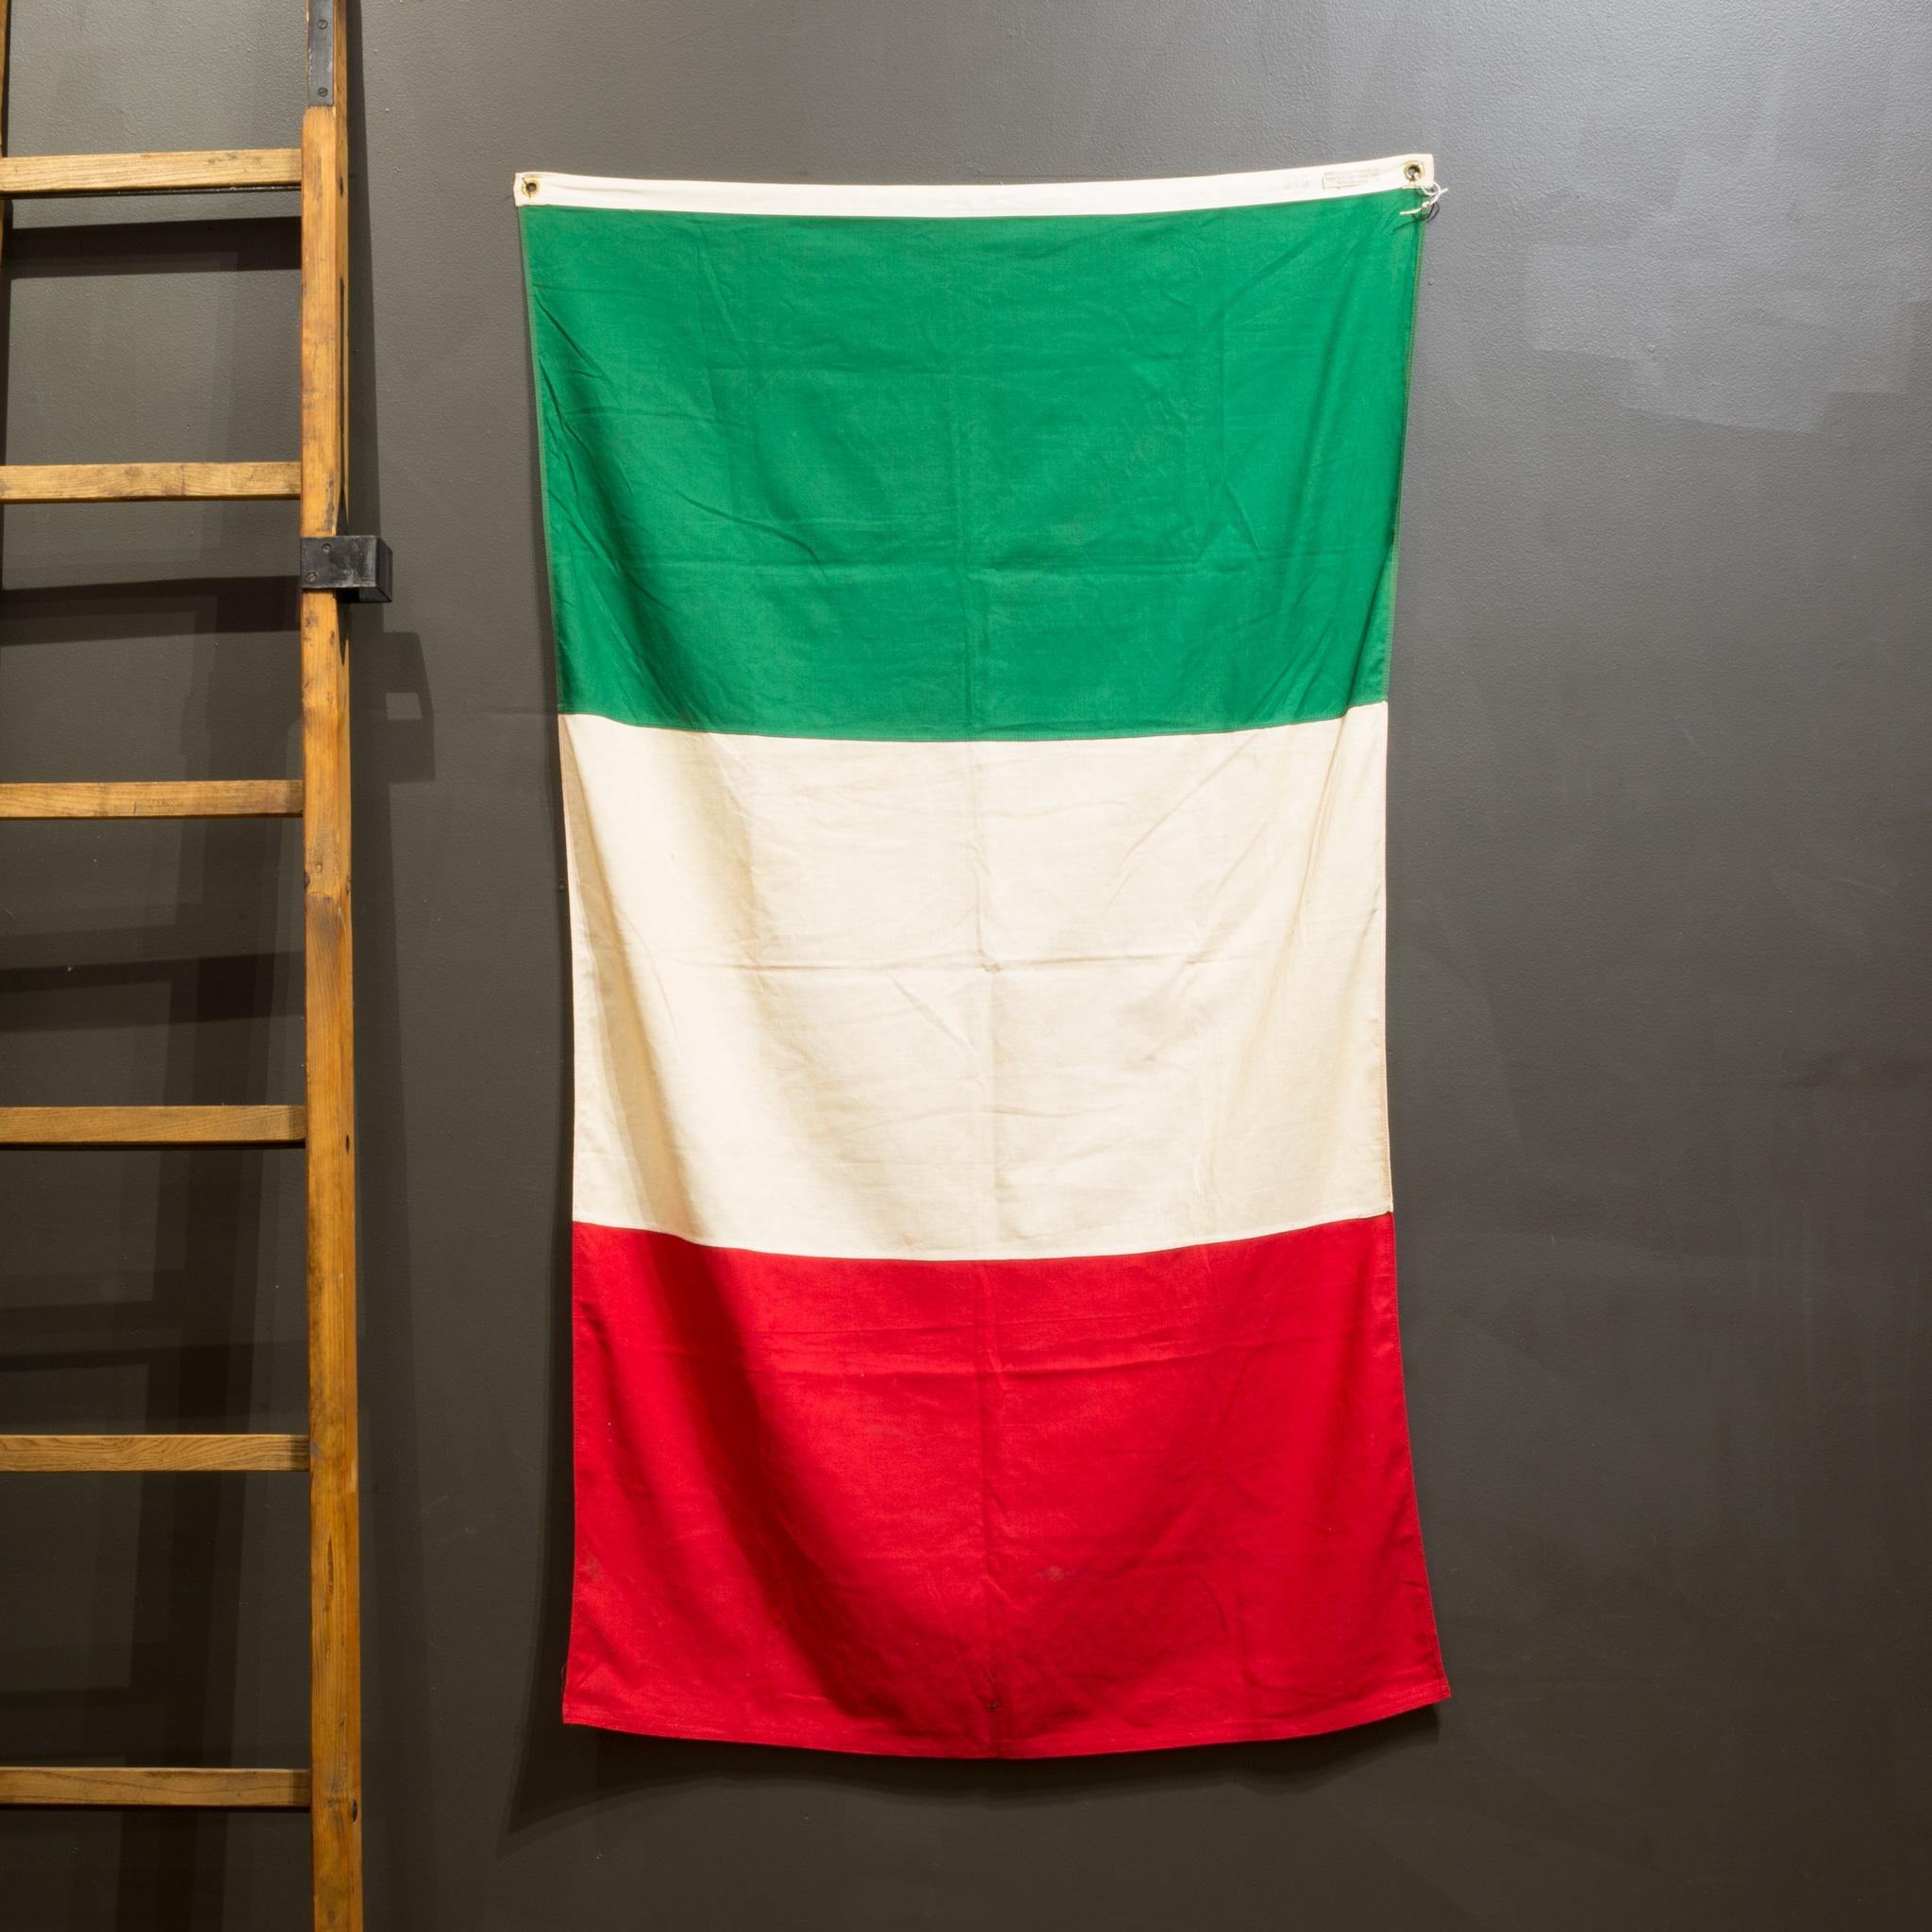 ABOUT

An original Italian flag with brass grommets to hang it.

    CREATOR American Flag and Banner Company, San Francisco.
    DATE OF MANUFACTURE c.1940-1950.
    MATERIALS AND TECHNIQUES Cotton, Brass. 
    CONDITION Good. Wear consistent with